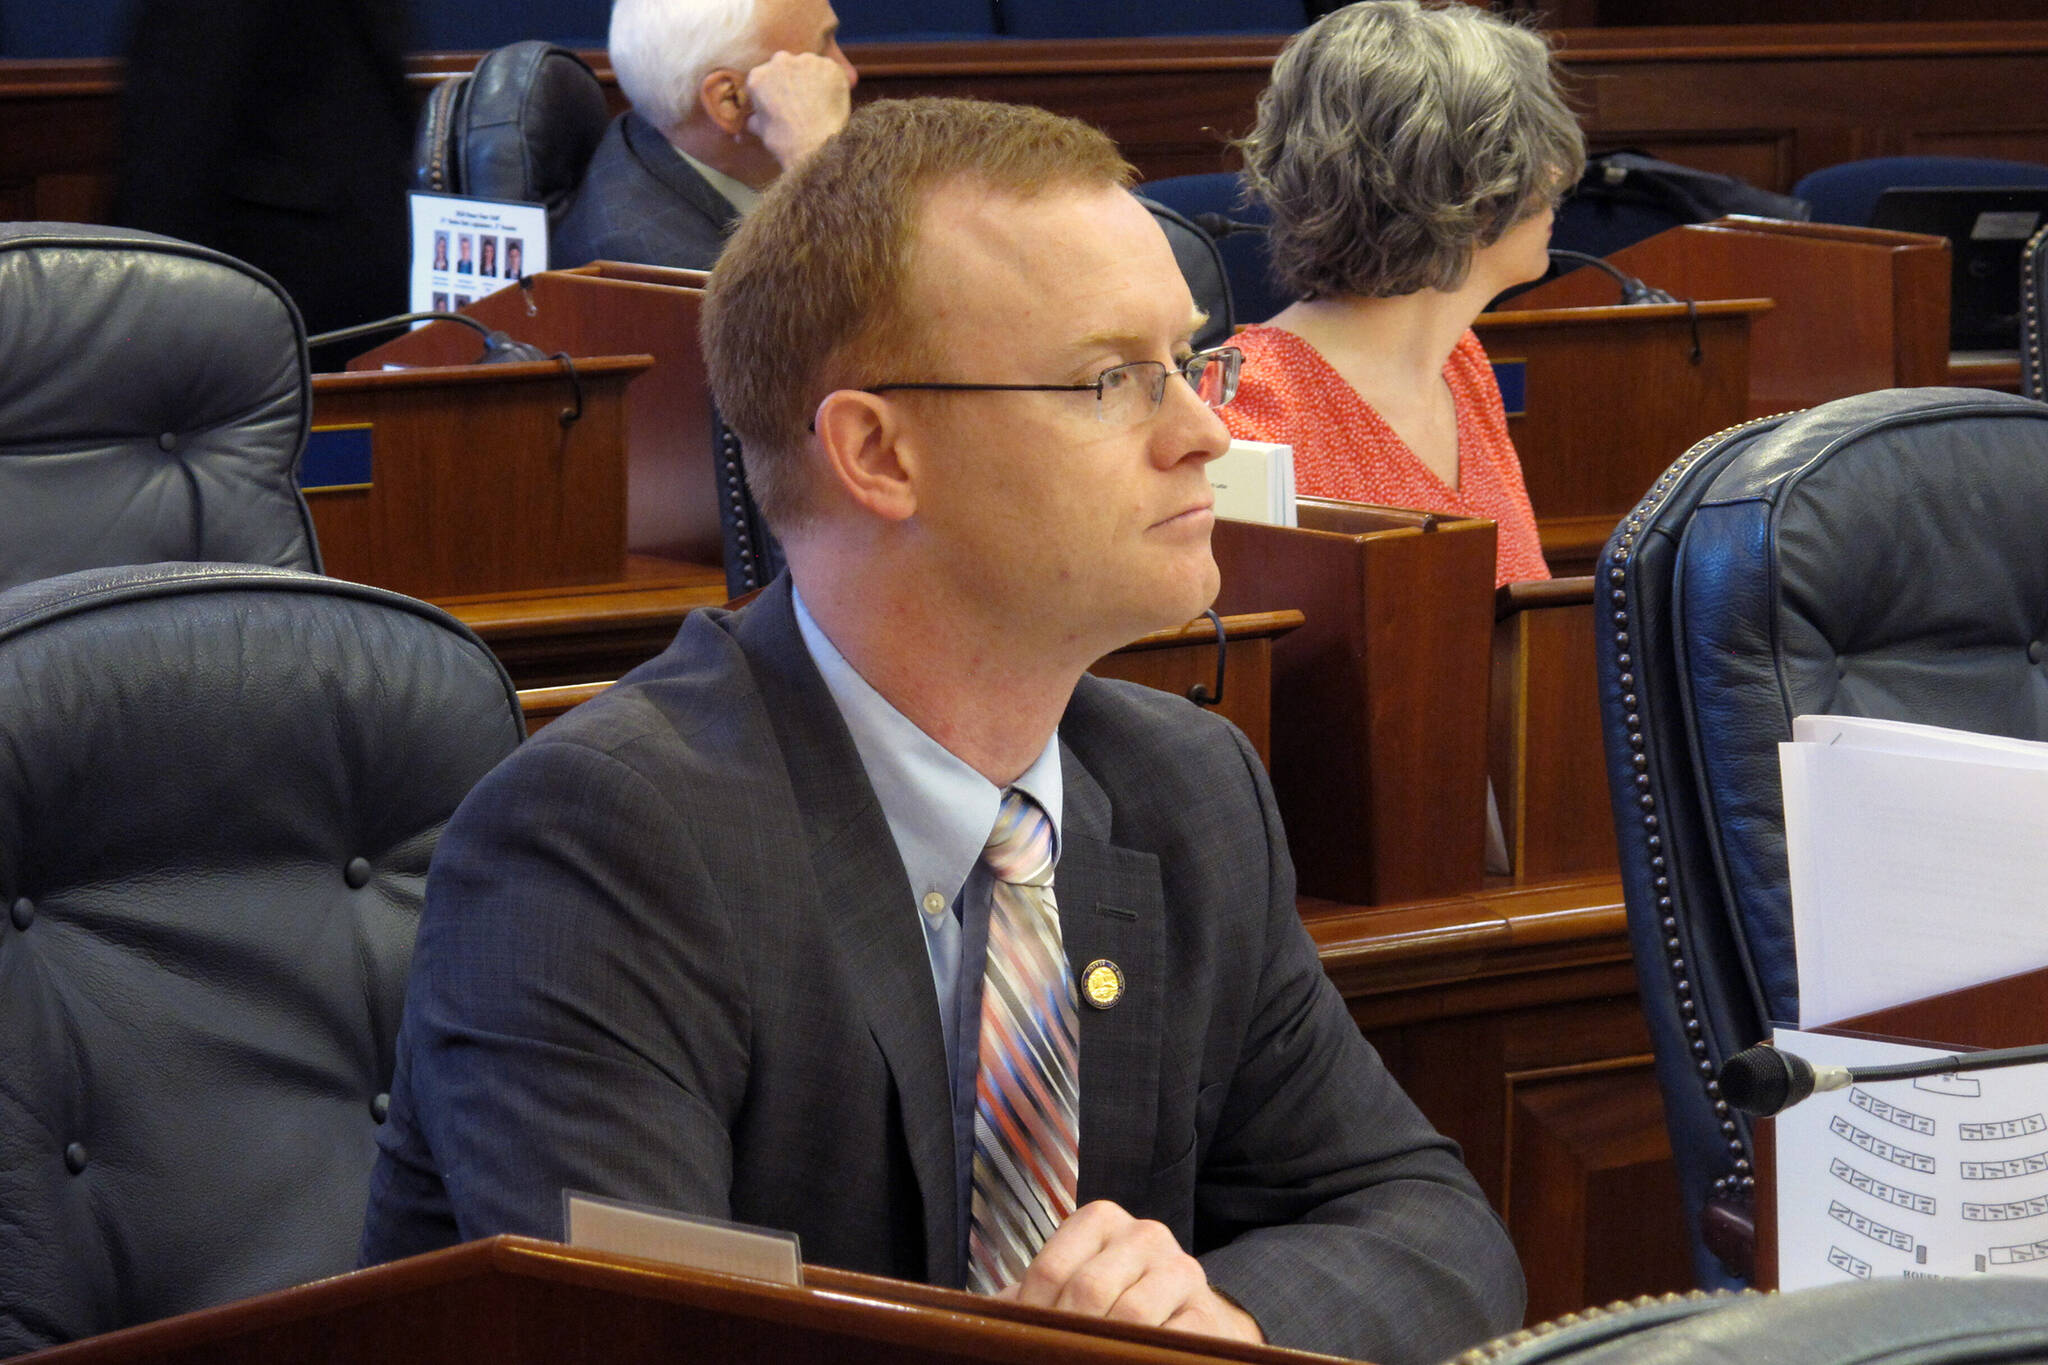 State Rep. David Eastman sits at his desk on the Alaska House floor in Juneau, Alaska, on March 5, 2020. Dozens of West Point graduates have demanded state Rep. Eastman resign from office over his ties to a right wing extremist group, saying his affiliation has betrayed the values of the U.S. Military Academy he attended. (AP Photo / Becky Bohrer)